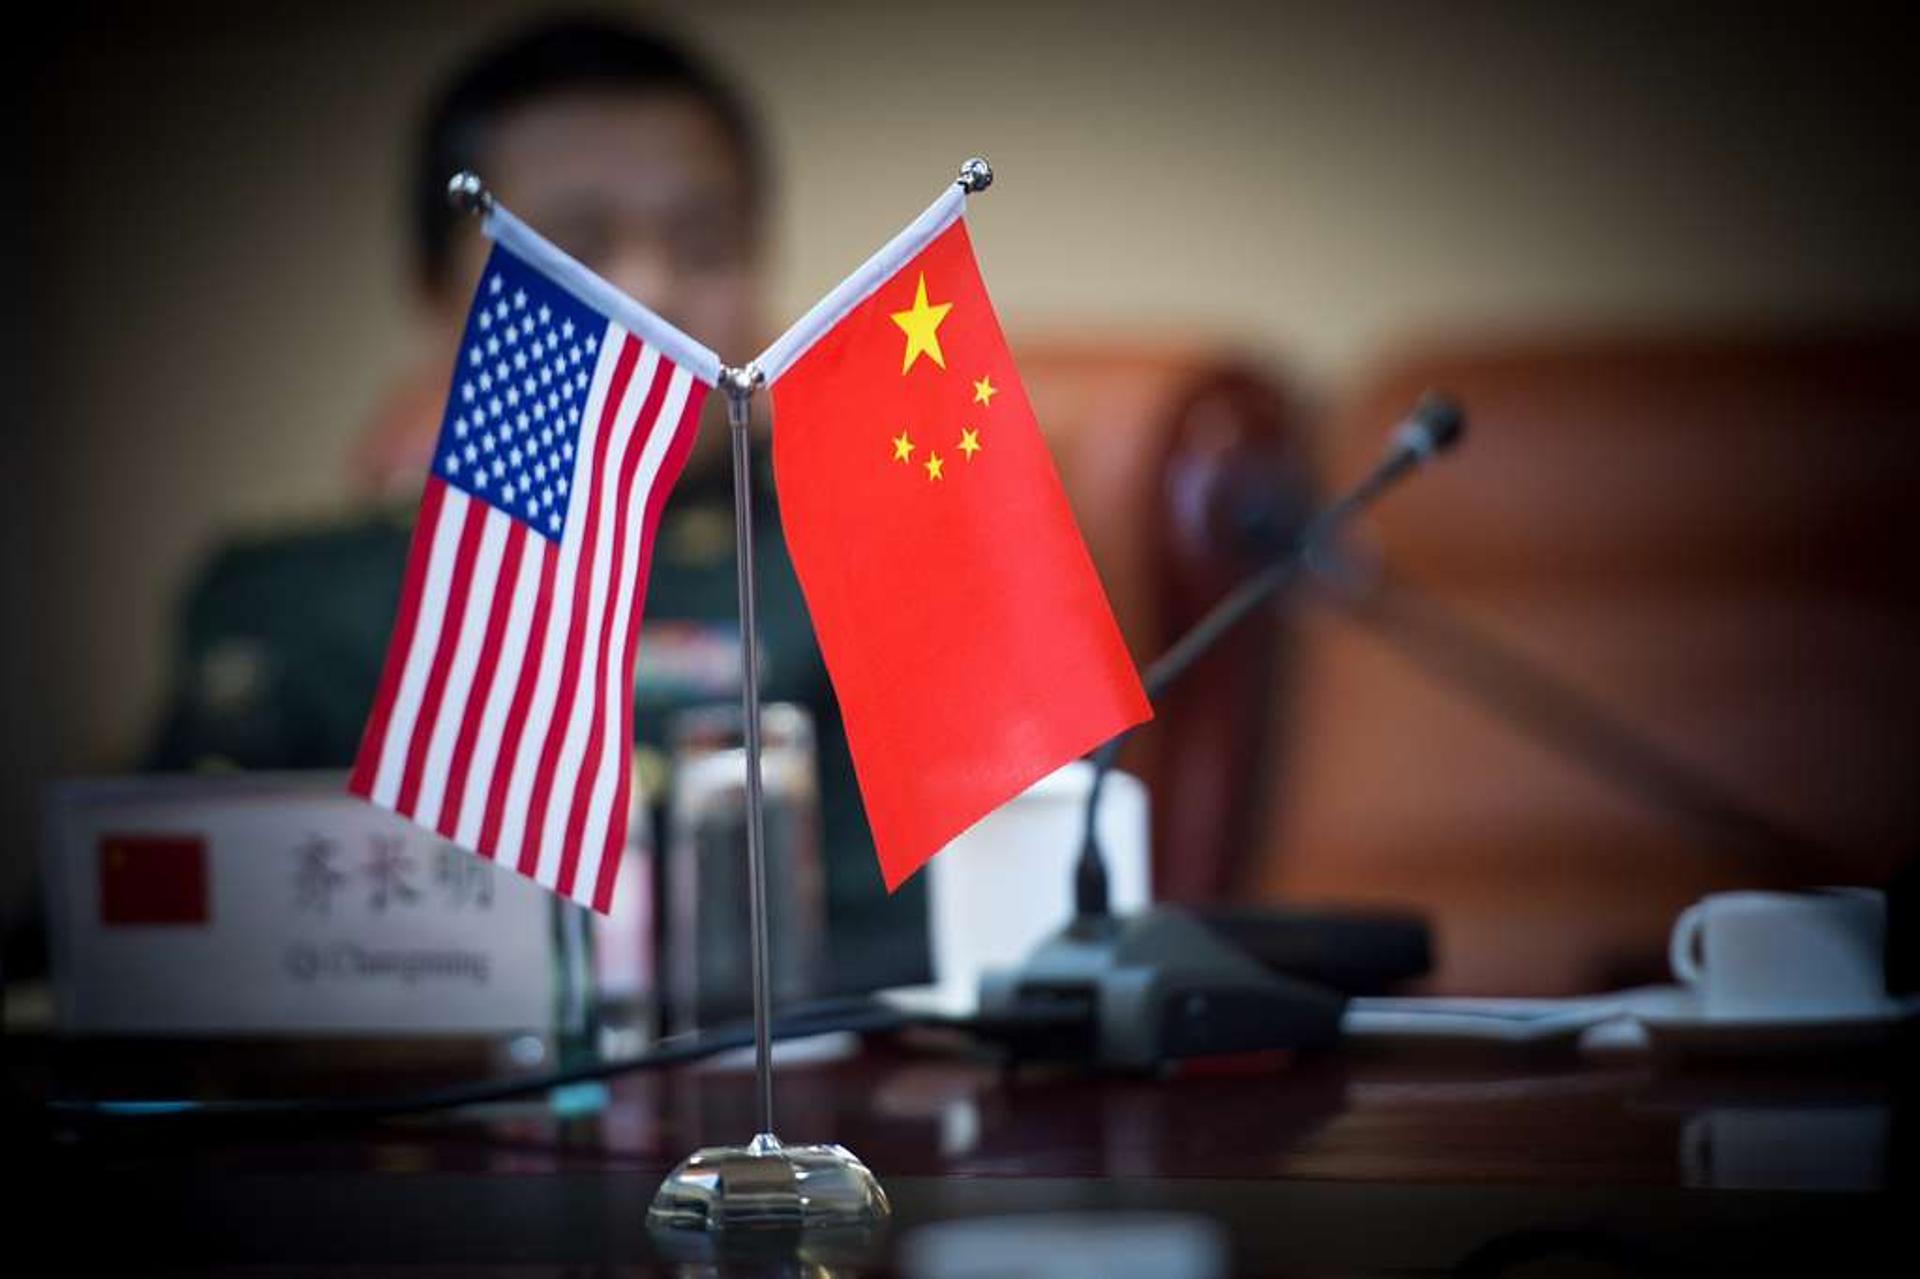 An American flag next to a Chinese flag 